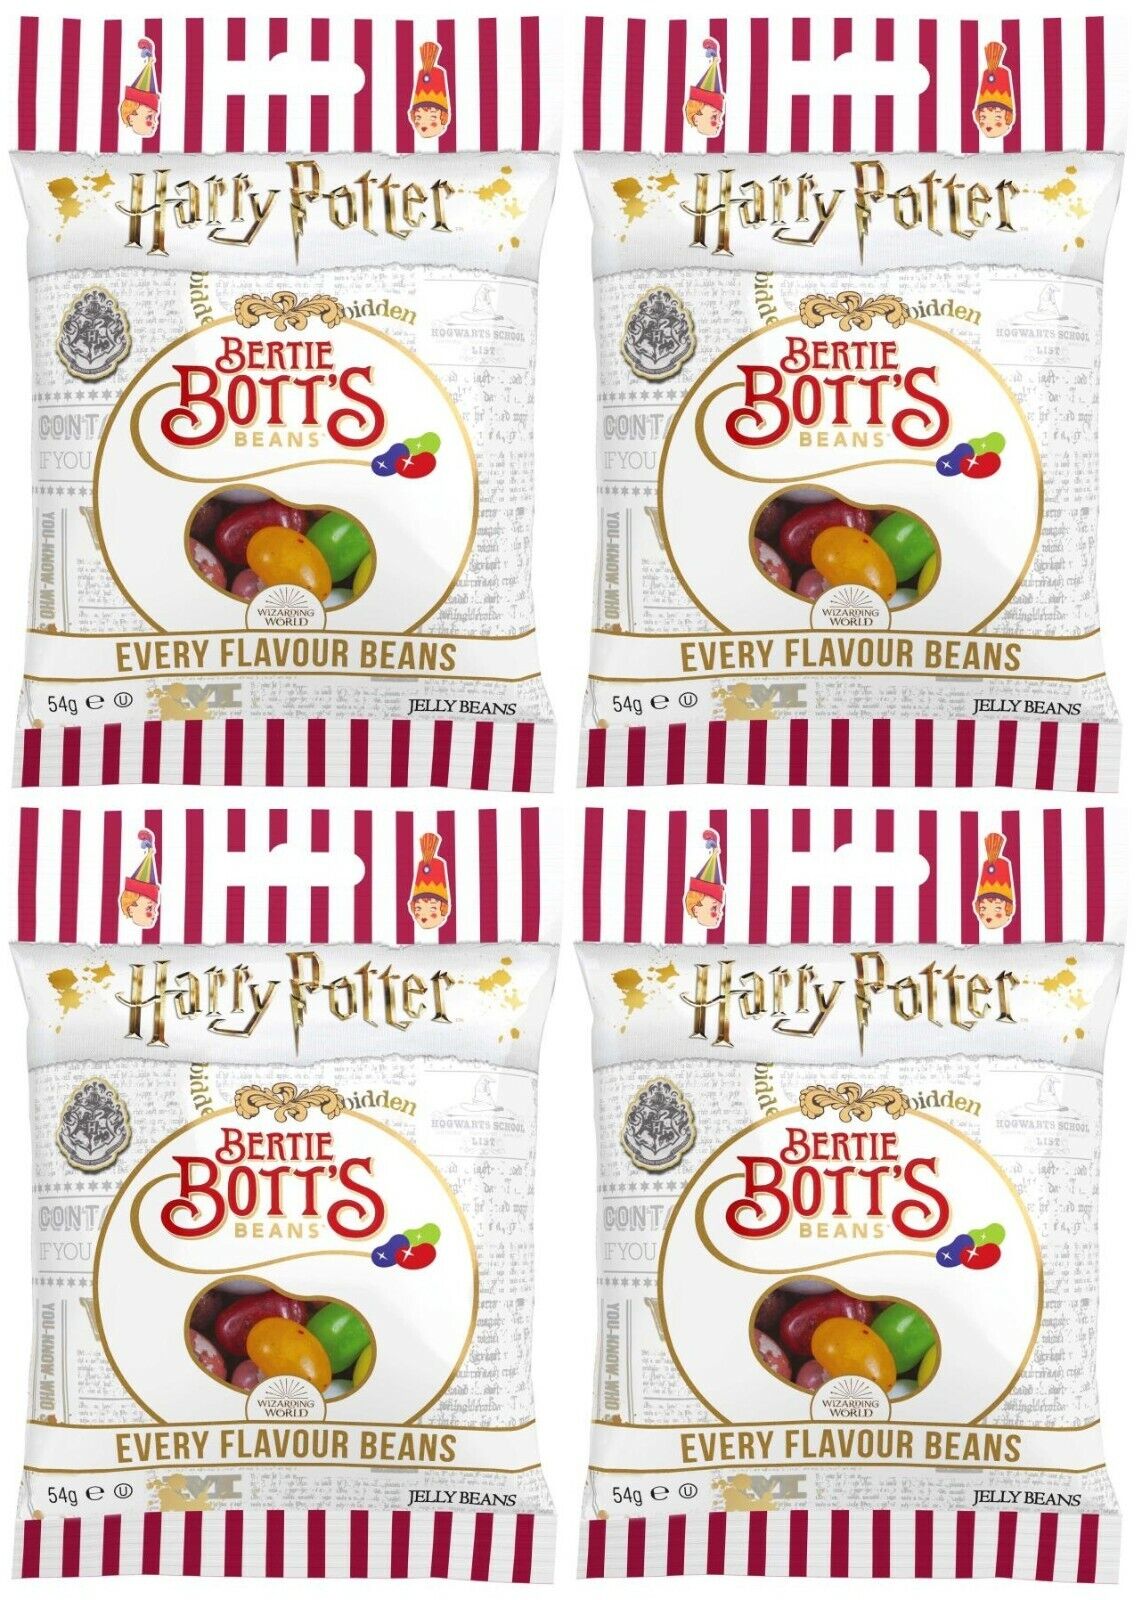 4x Jelly Belly Harry Potter Bertie Botts Flavour Beans 54g American Sweets